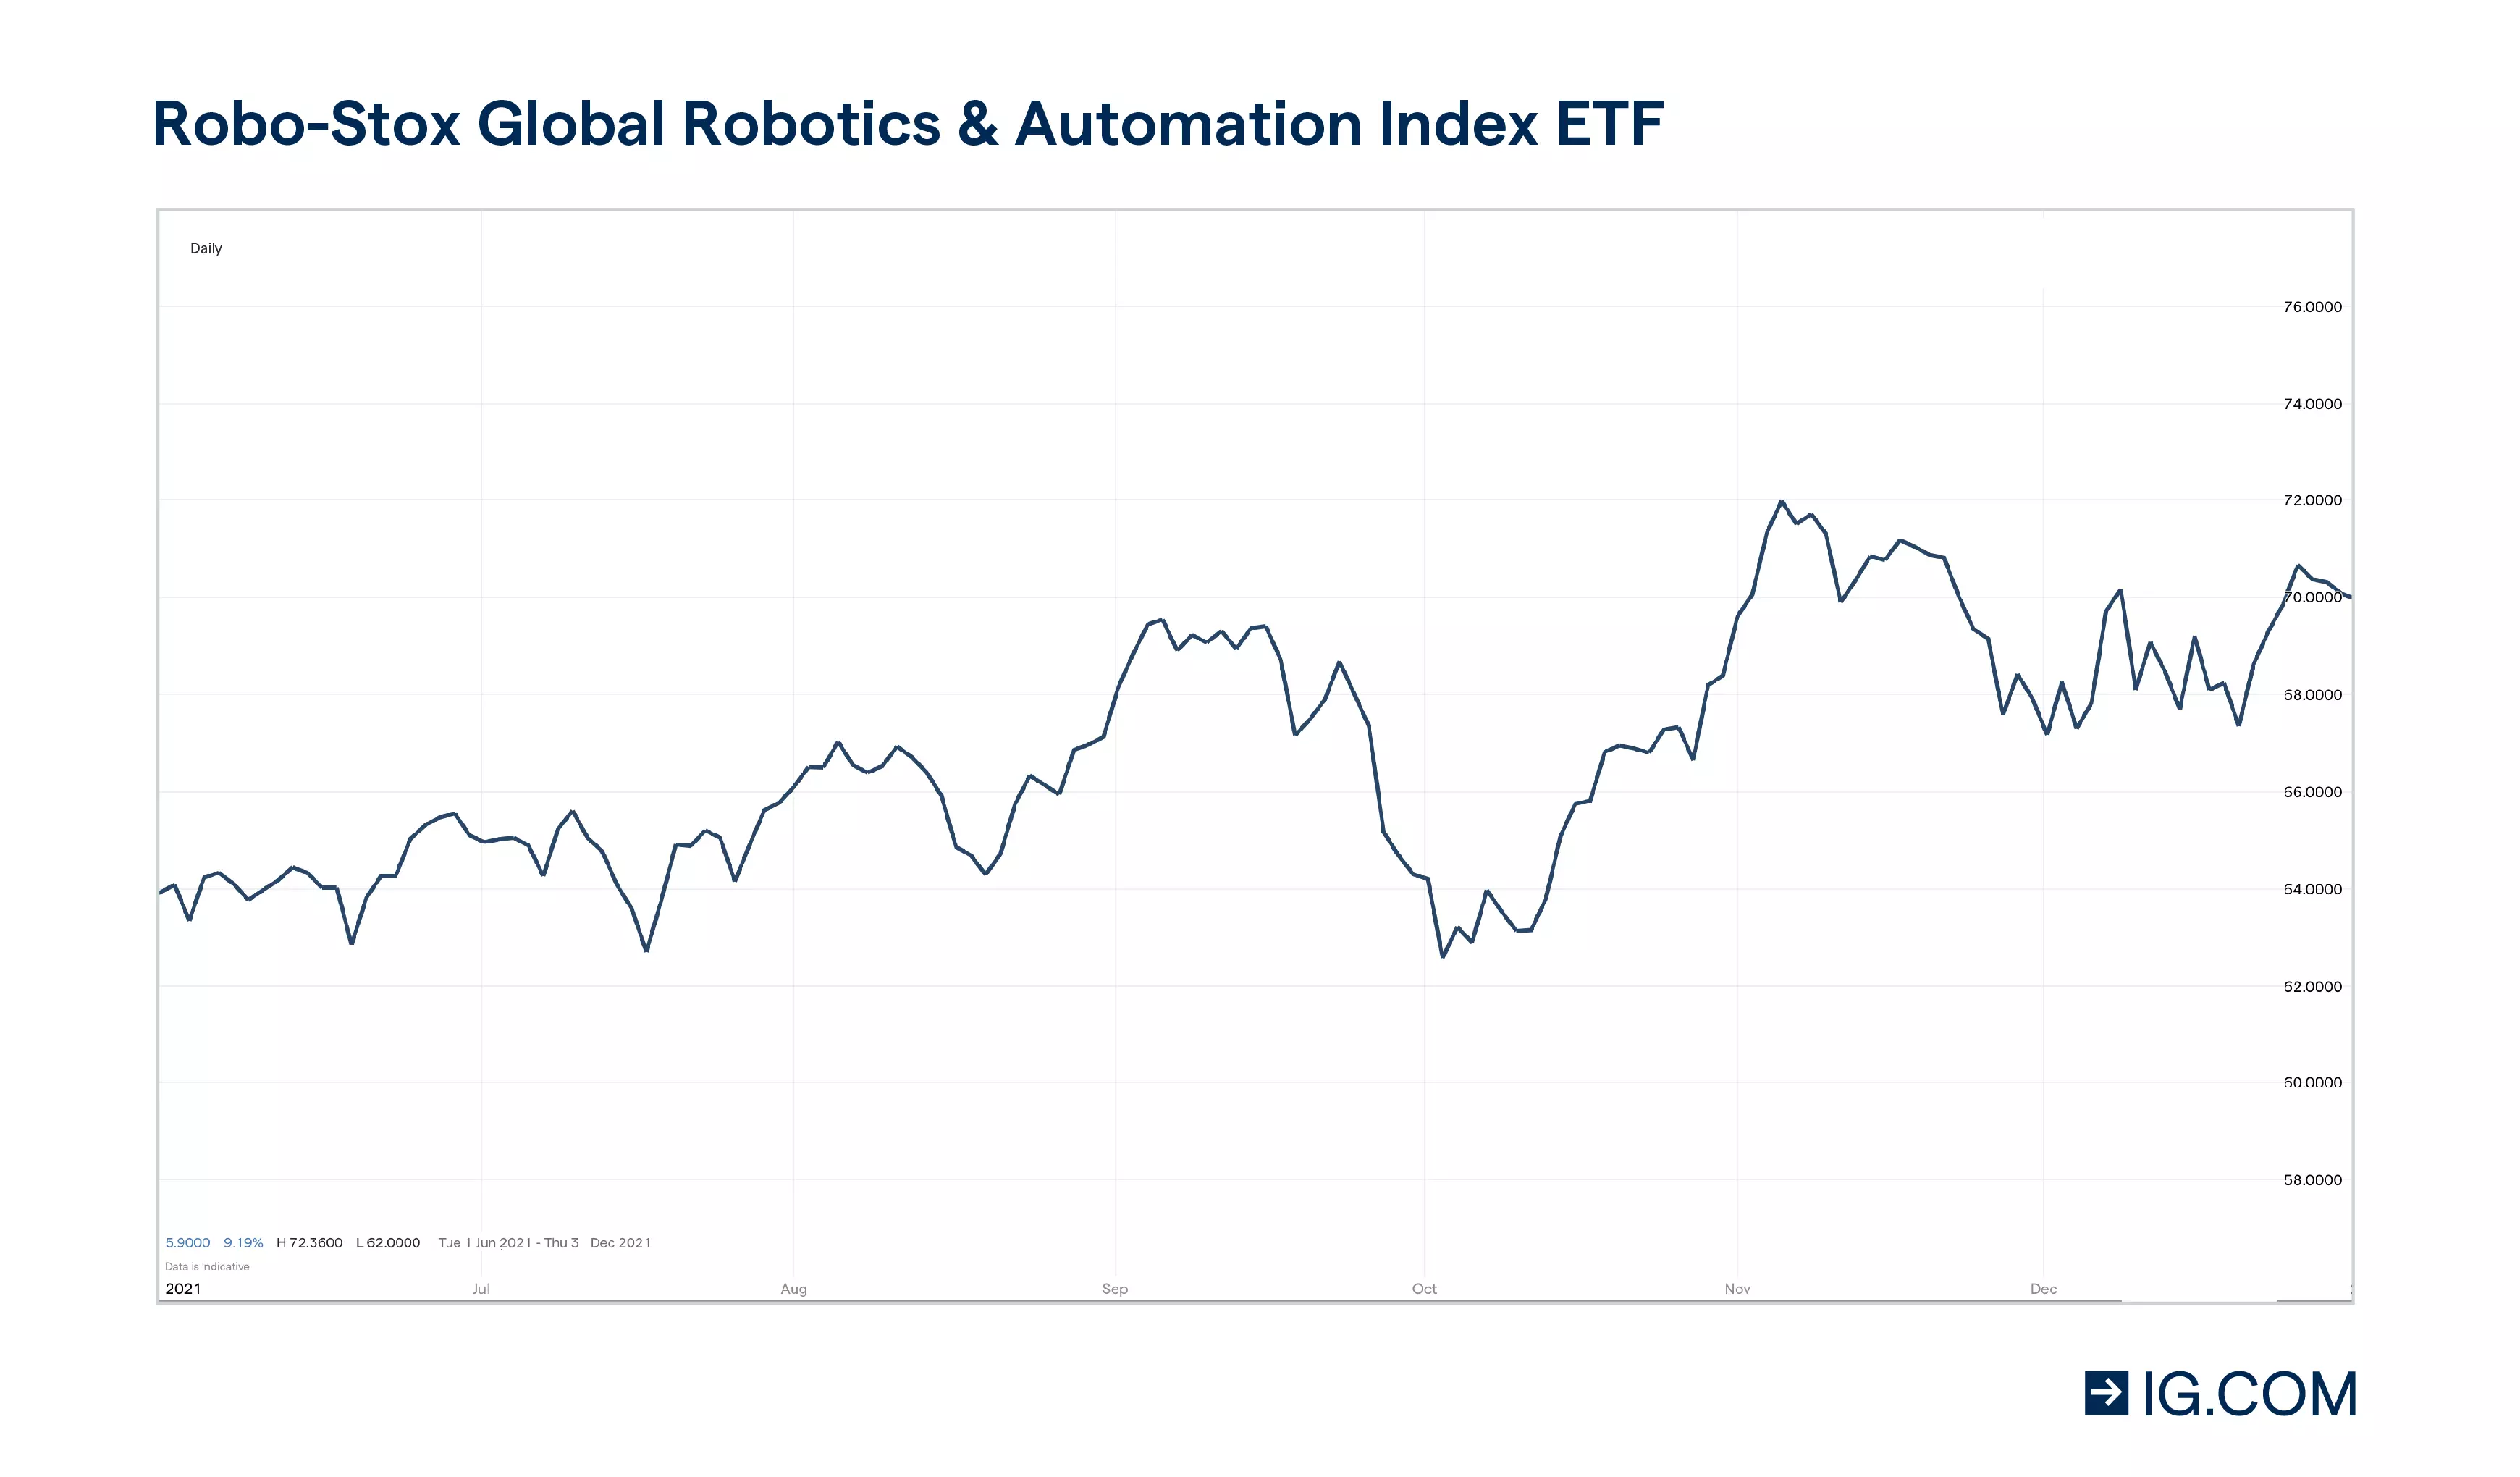 Chart of ROBO-Stox Global Robotics & Automation share prices over the period of 2021